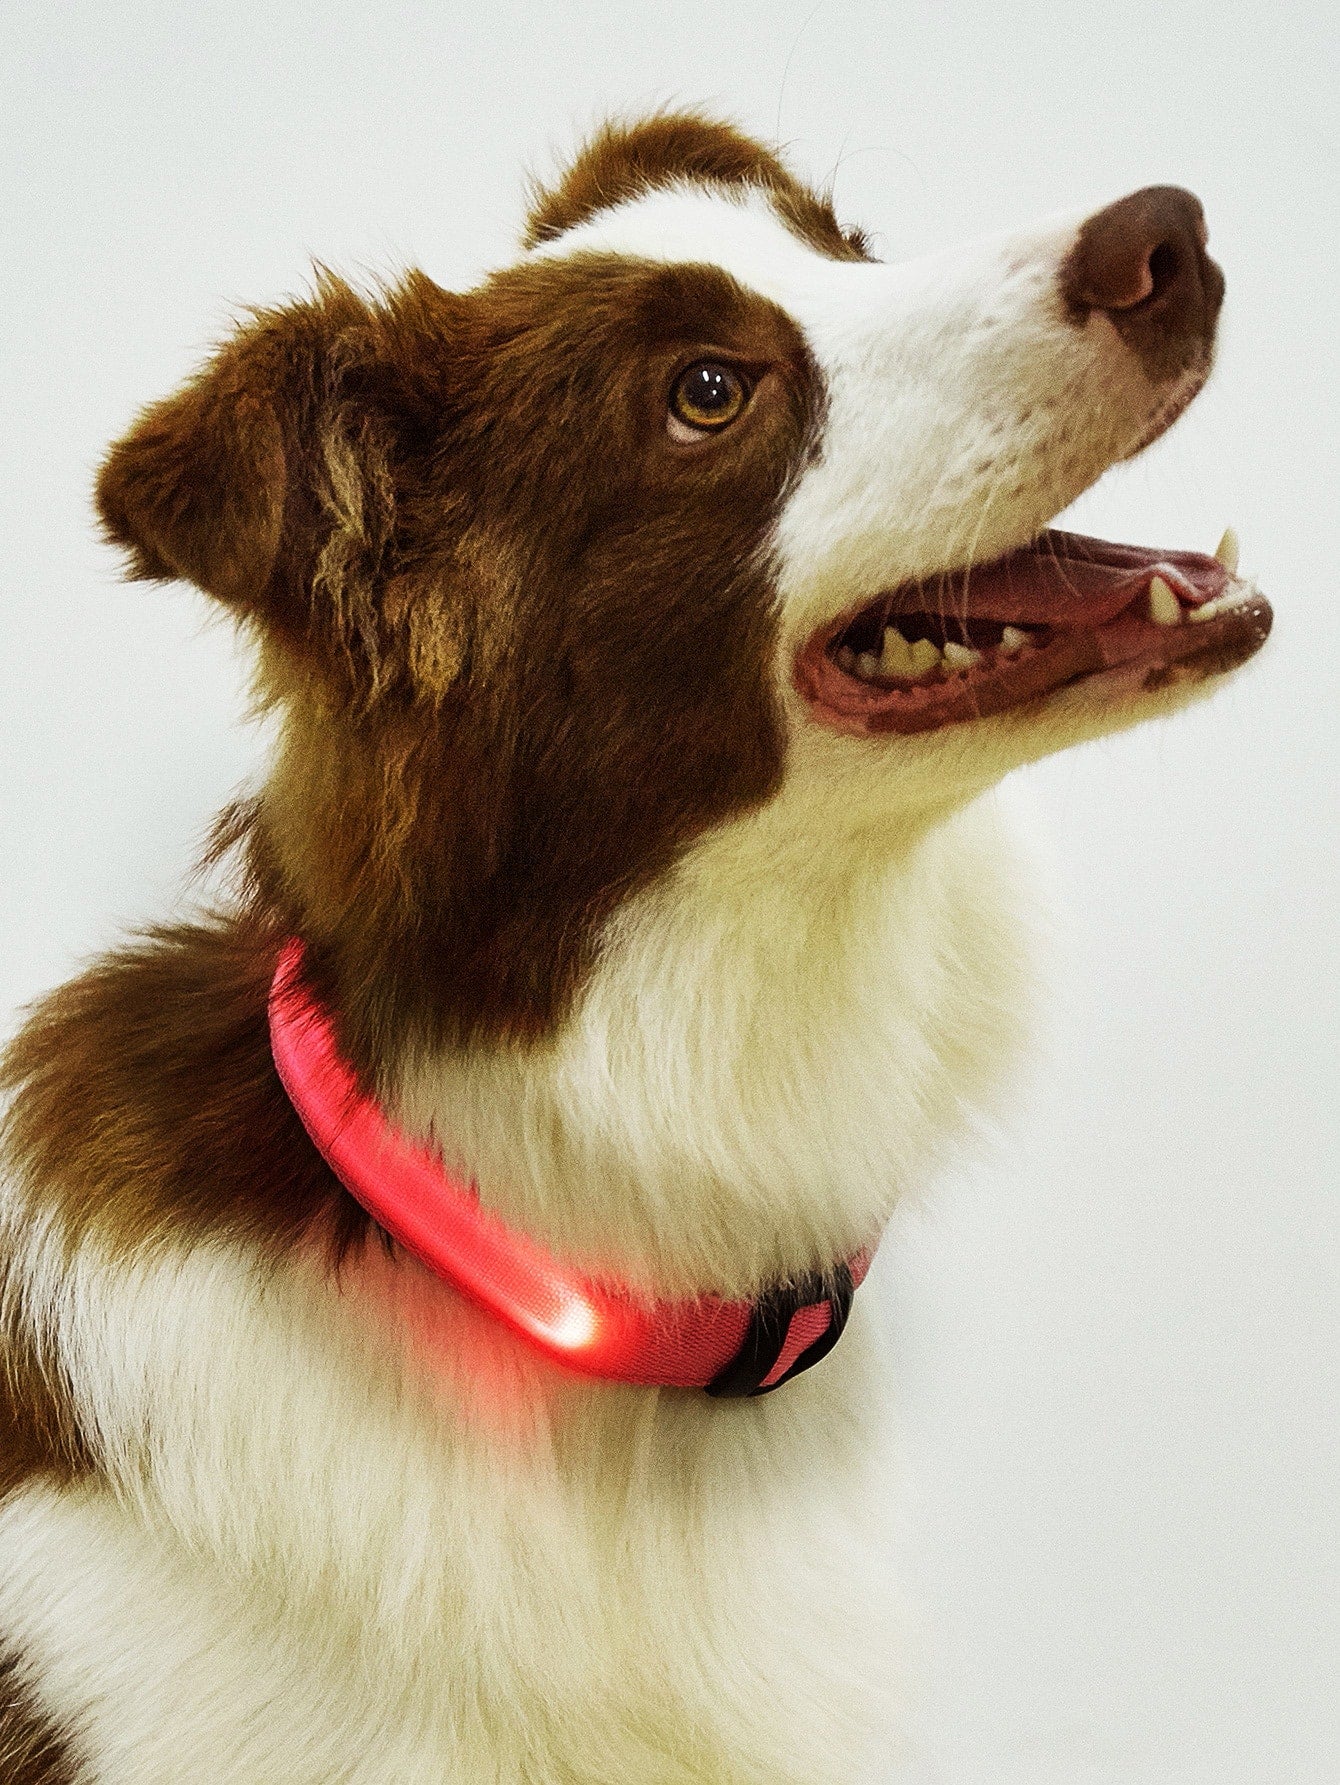 1pc LED Light Up Dog Collar For Night Safety Walking With Quick Snap Buckle Adjustable Comfortable Nylon Collar For Small Medium Large Dogs